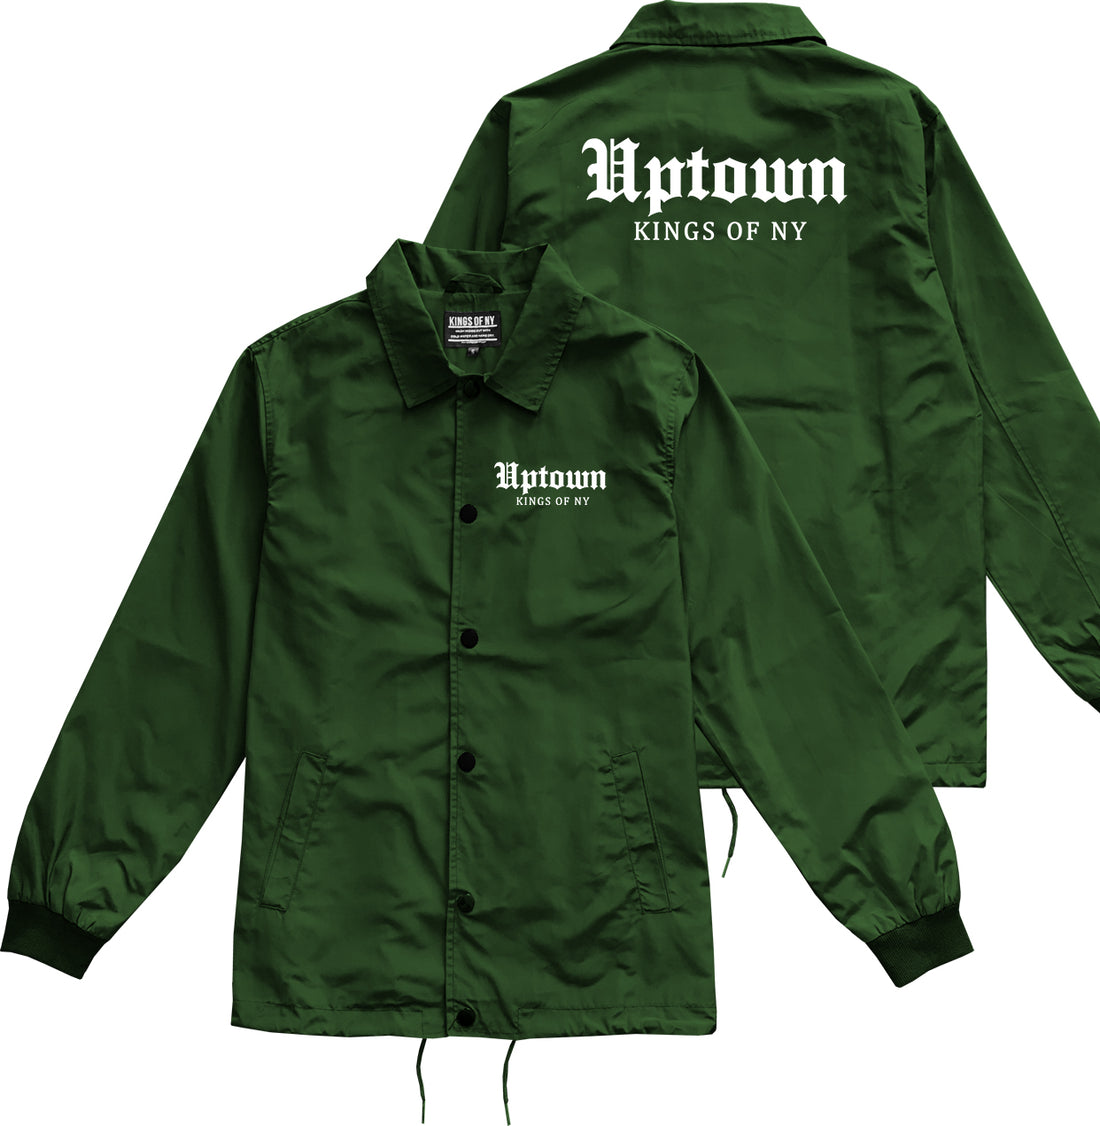 Uptown Old English Mens Coaches Jacket Green by Kings Of NY